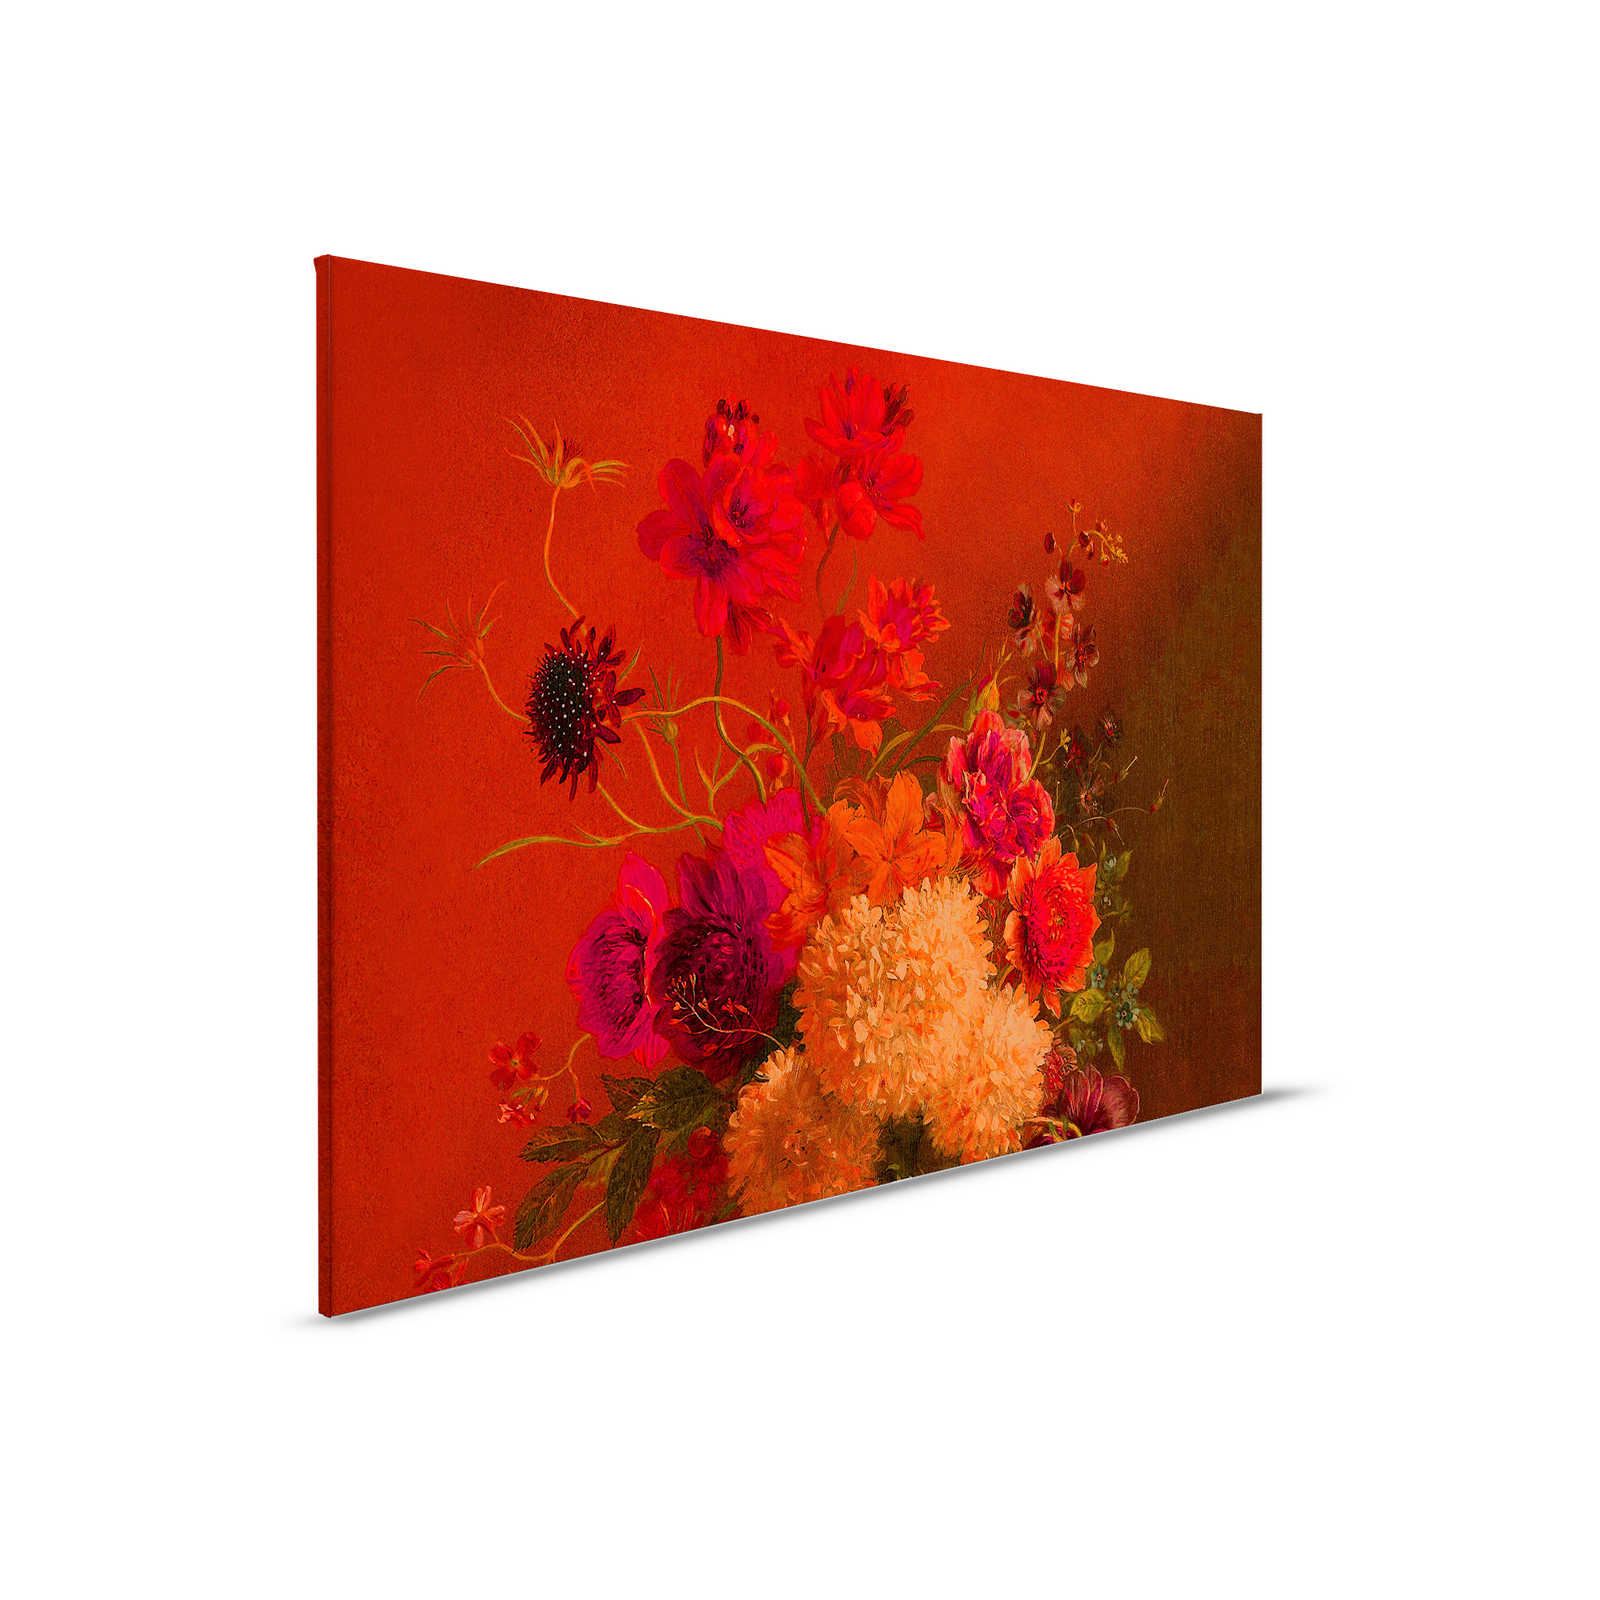 Neon Canvas Painting with Flowers Still Life | walls by patel - 0.90 m x 0.60 m
